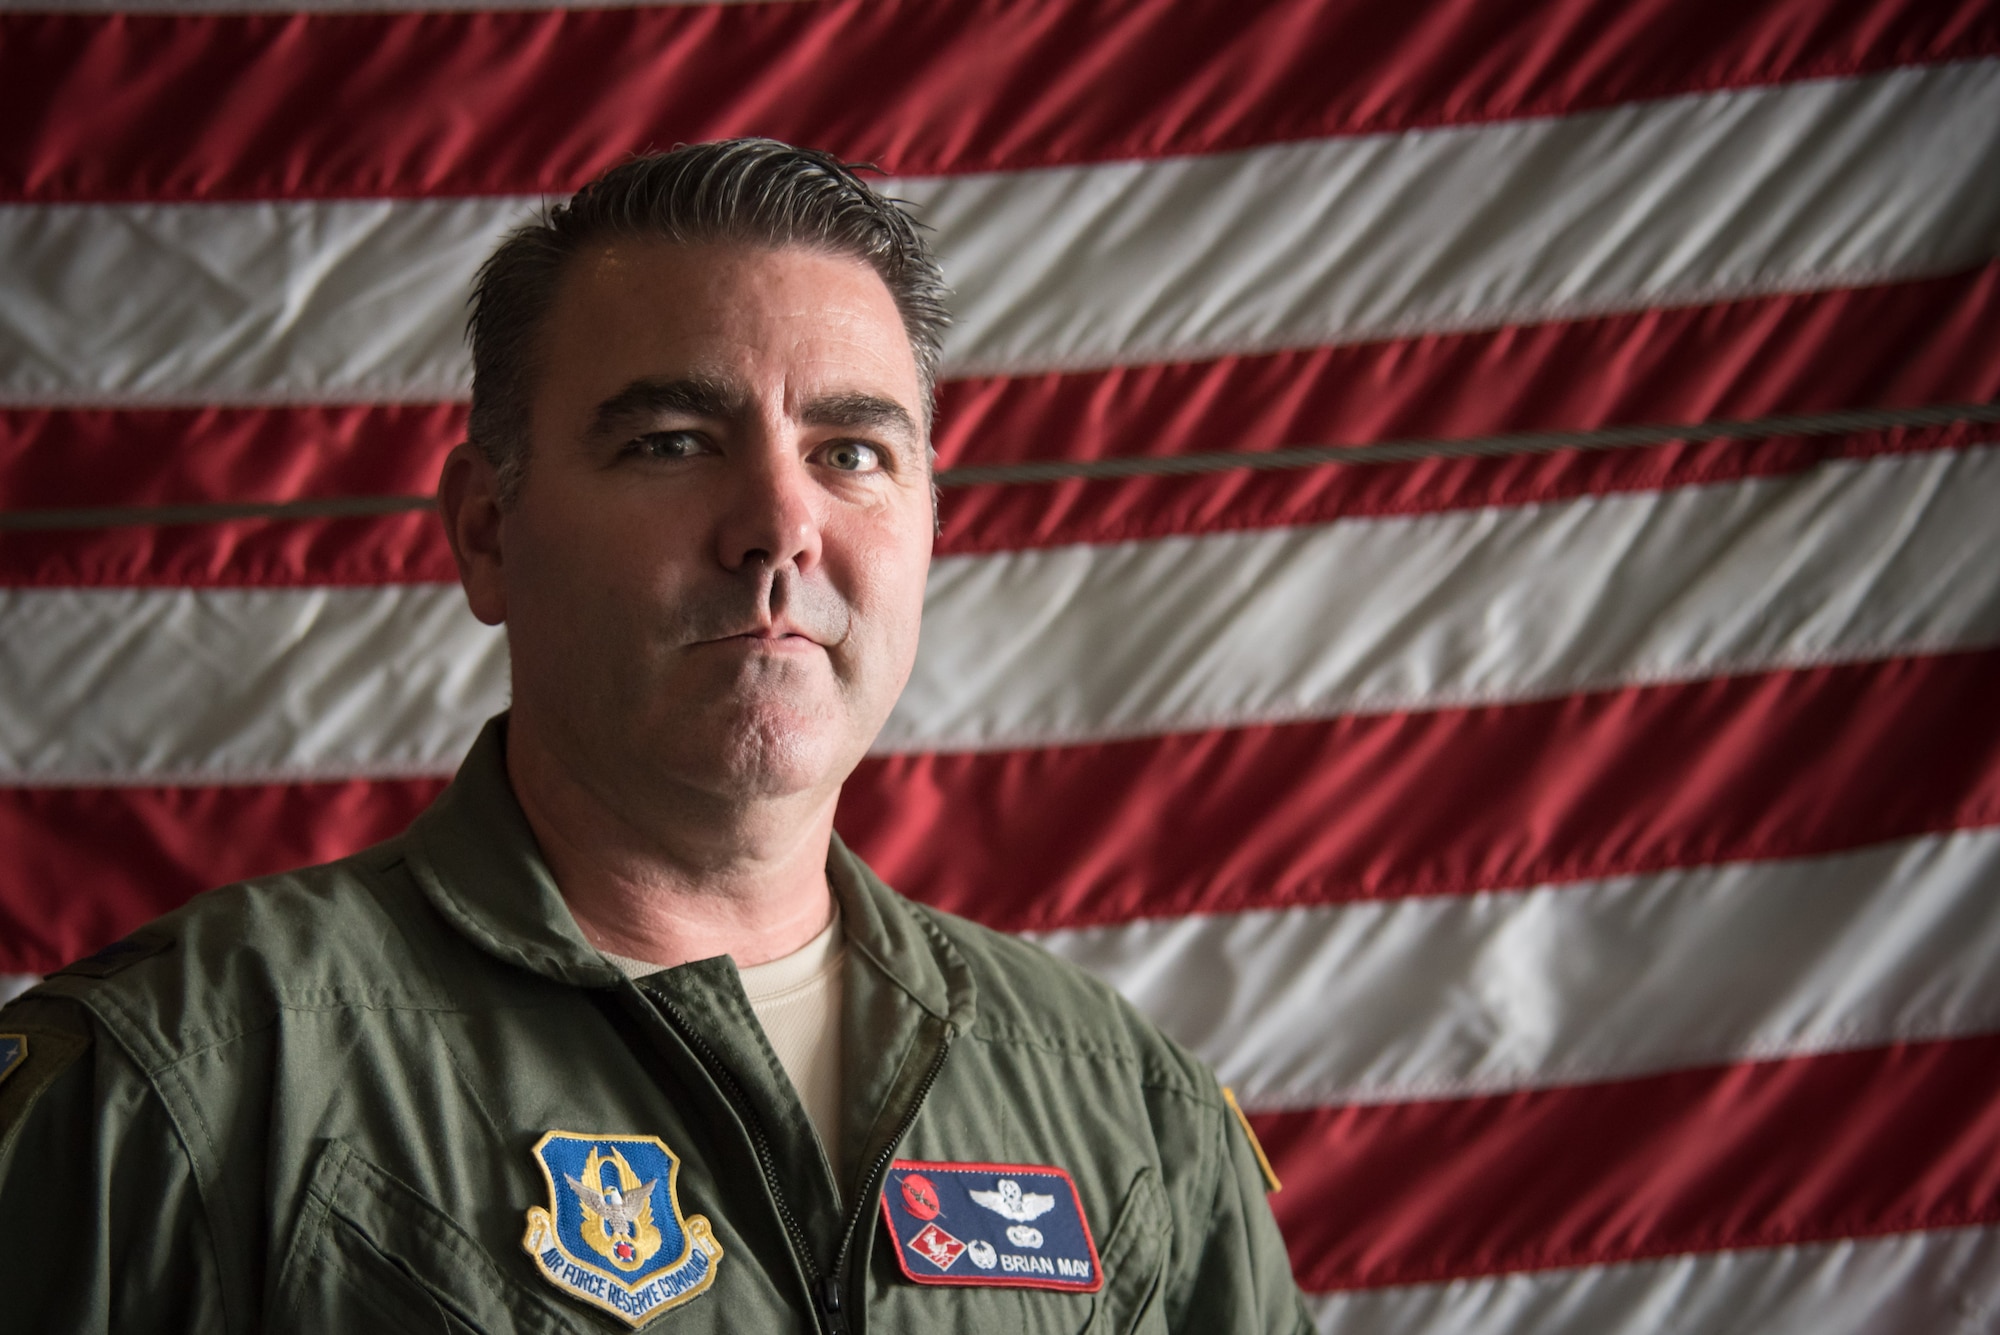 Col. Brian May, 403rd Operations Group commander, poses for a photo on board a C-130J Super Hercules aircraft May 4, 2017 at Keesler Air Force Base Mississippi. (U.S. Air Force photo/Staff Sgt. Heather Heiney)